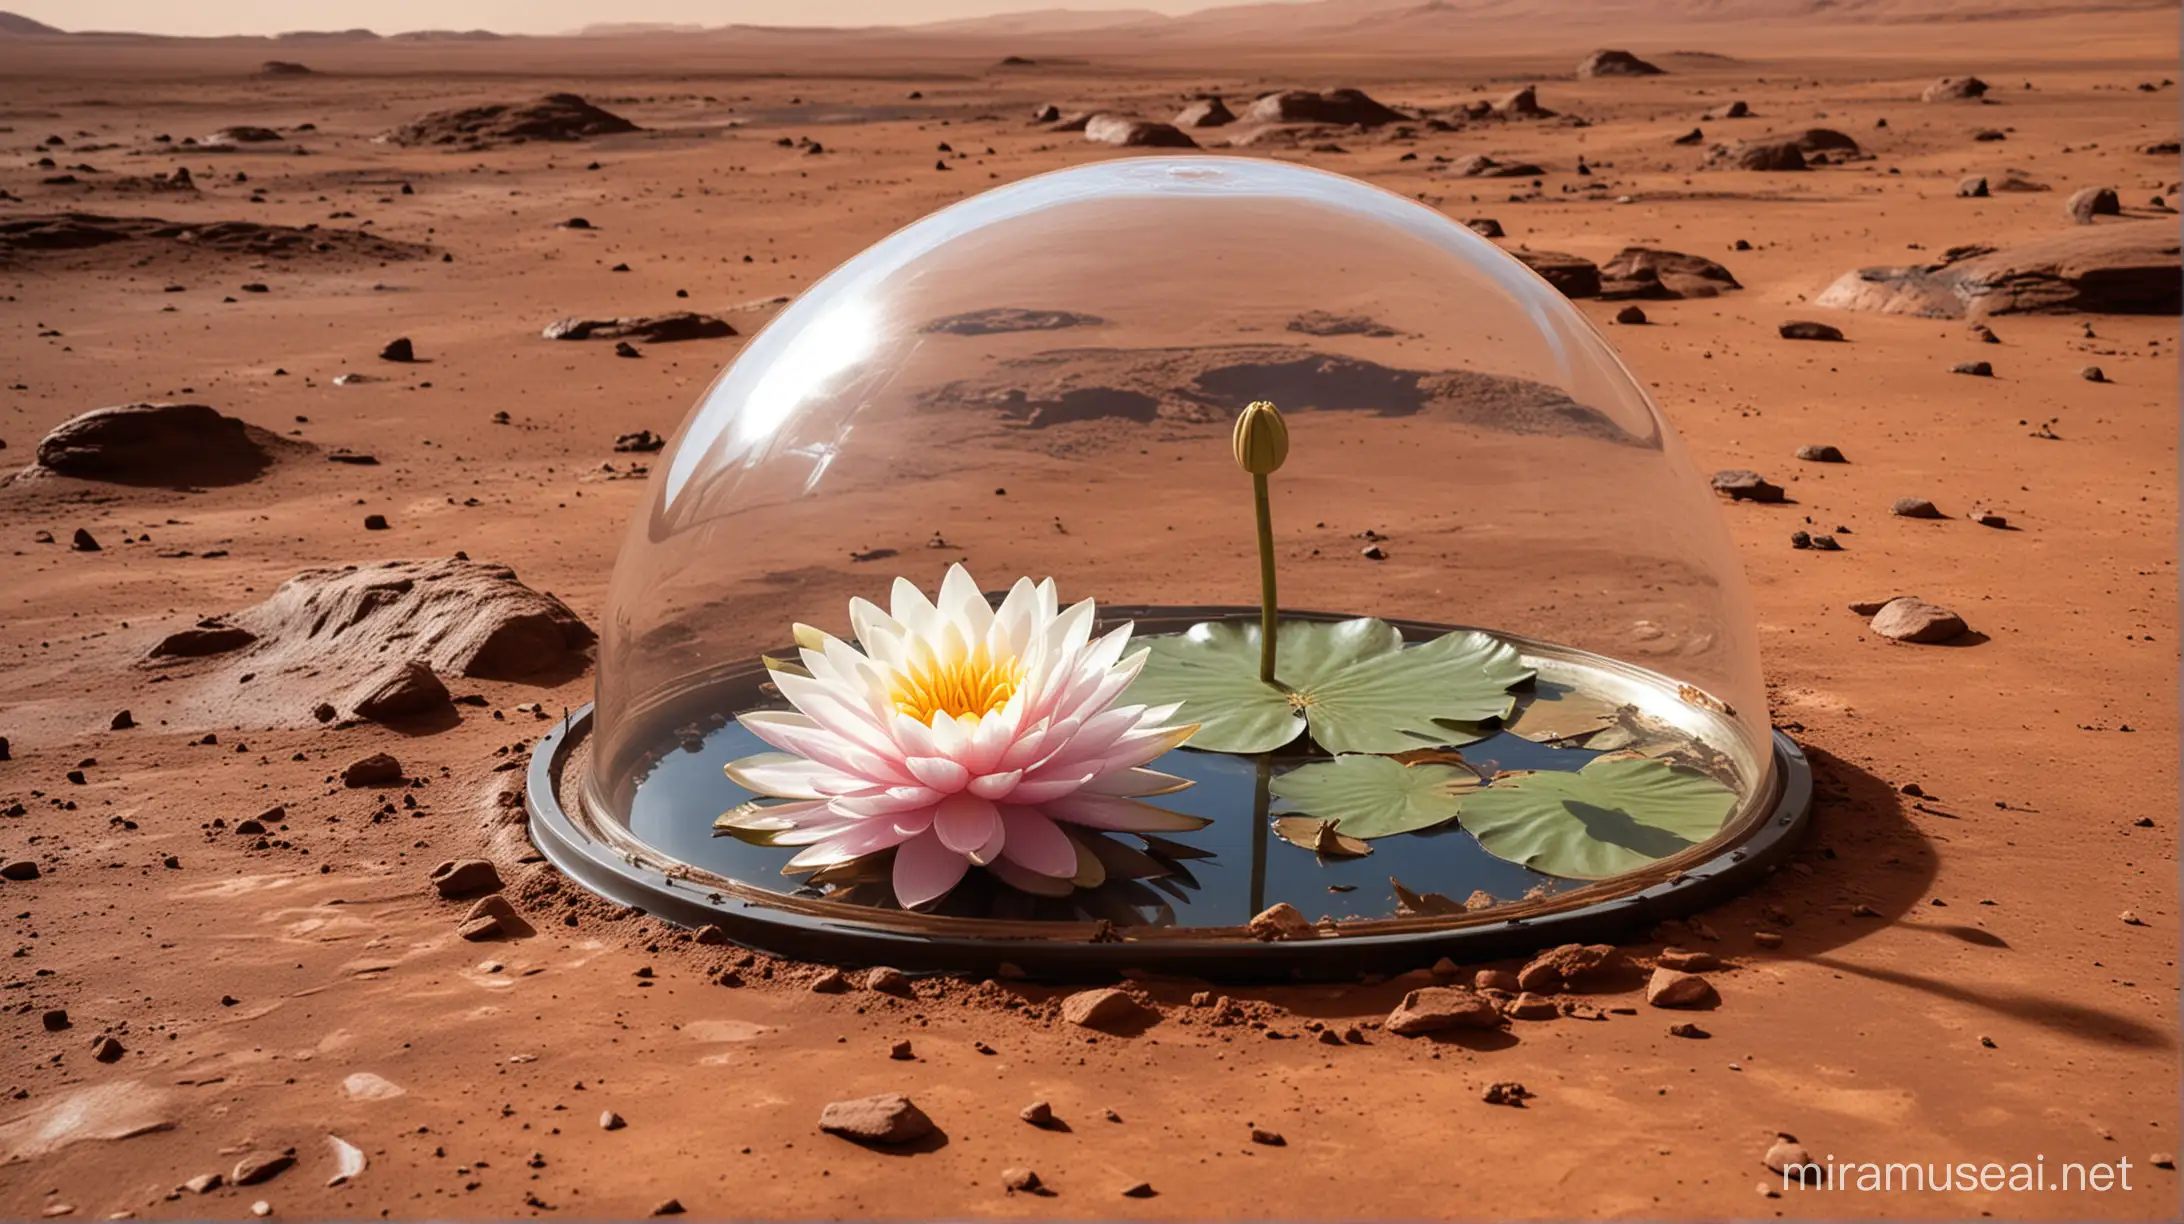 water lily under glass dome on mars surface